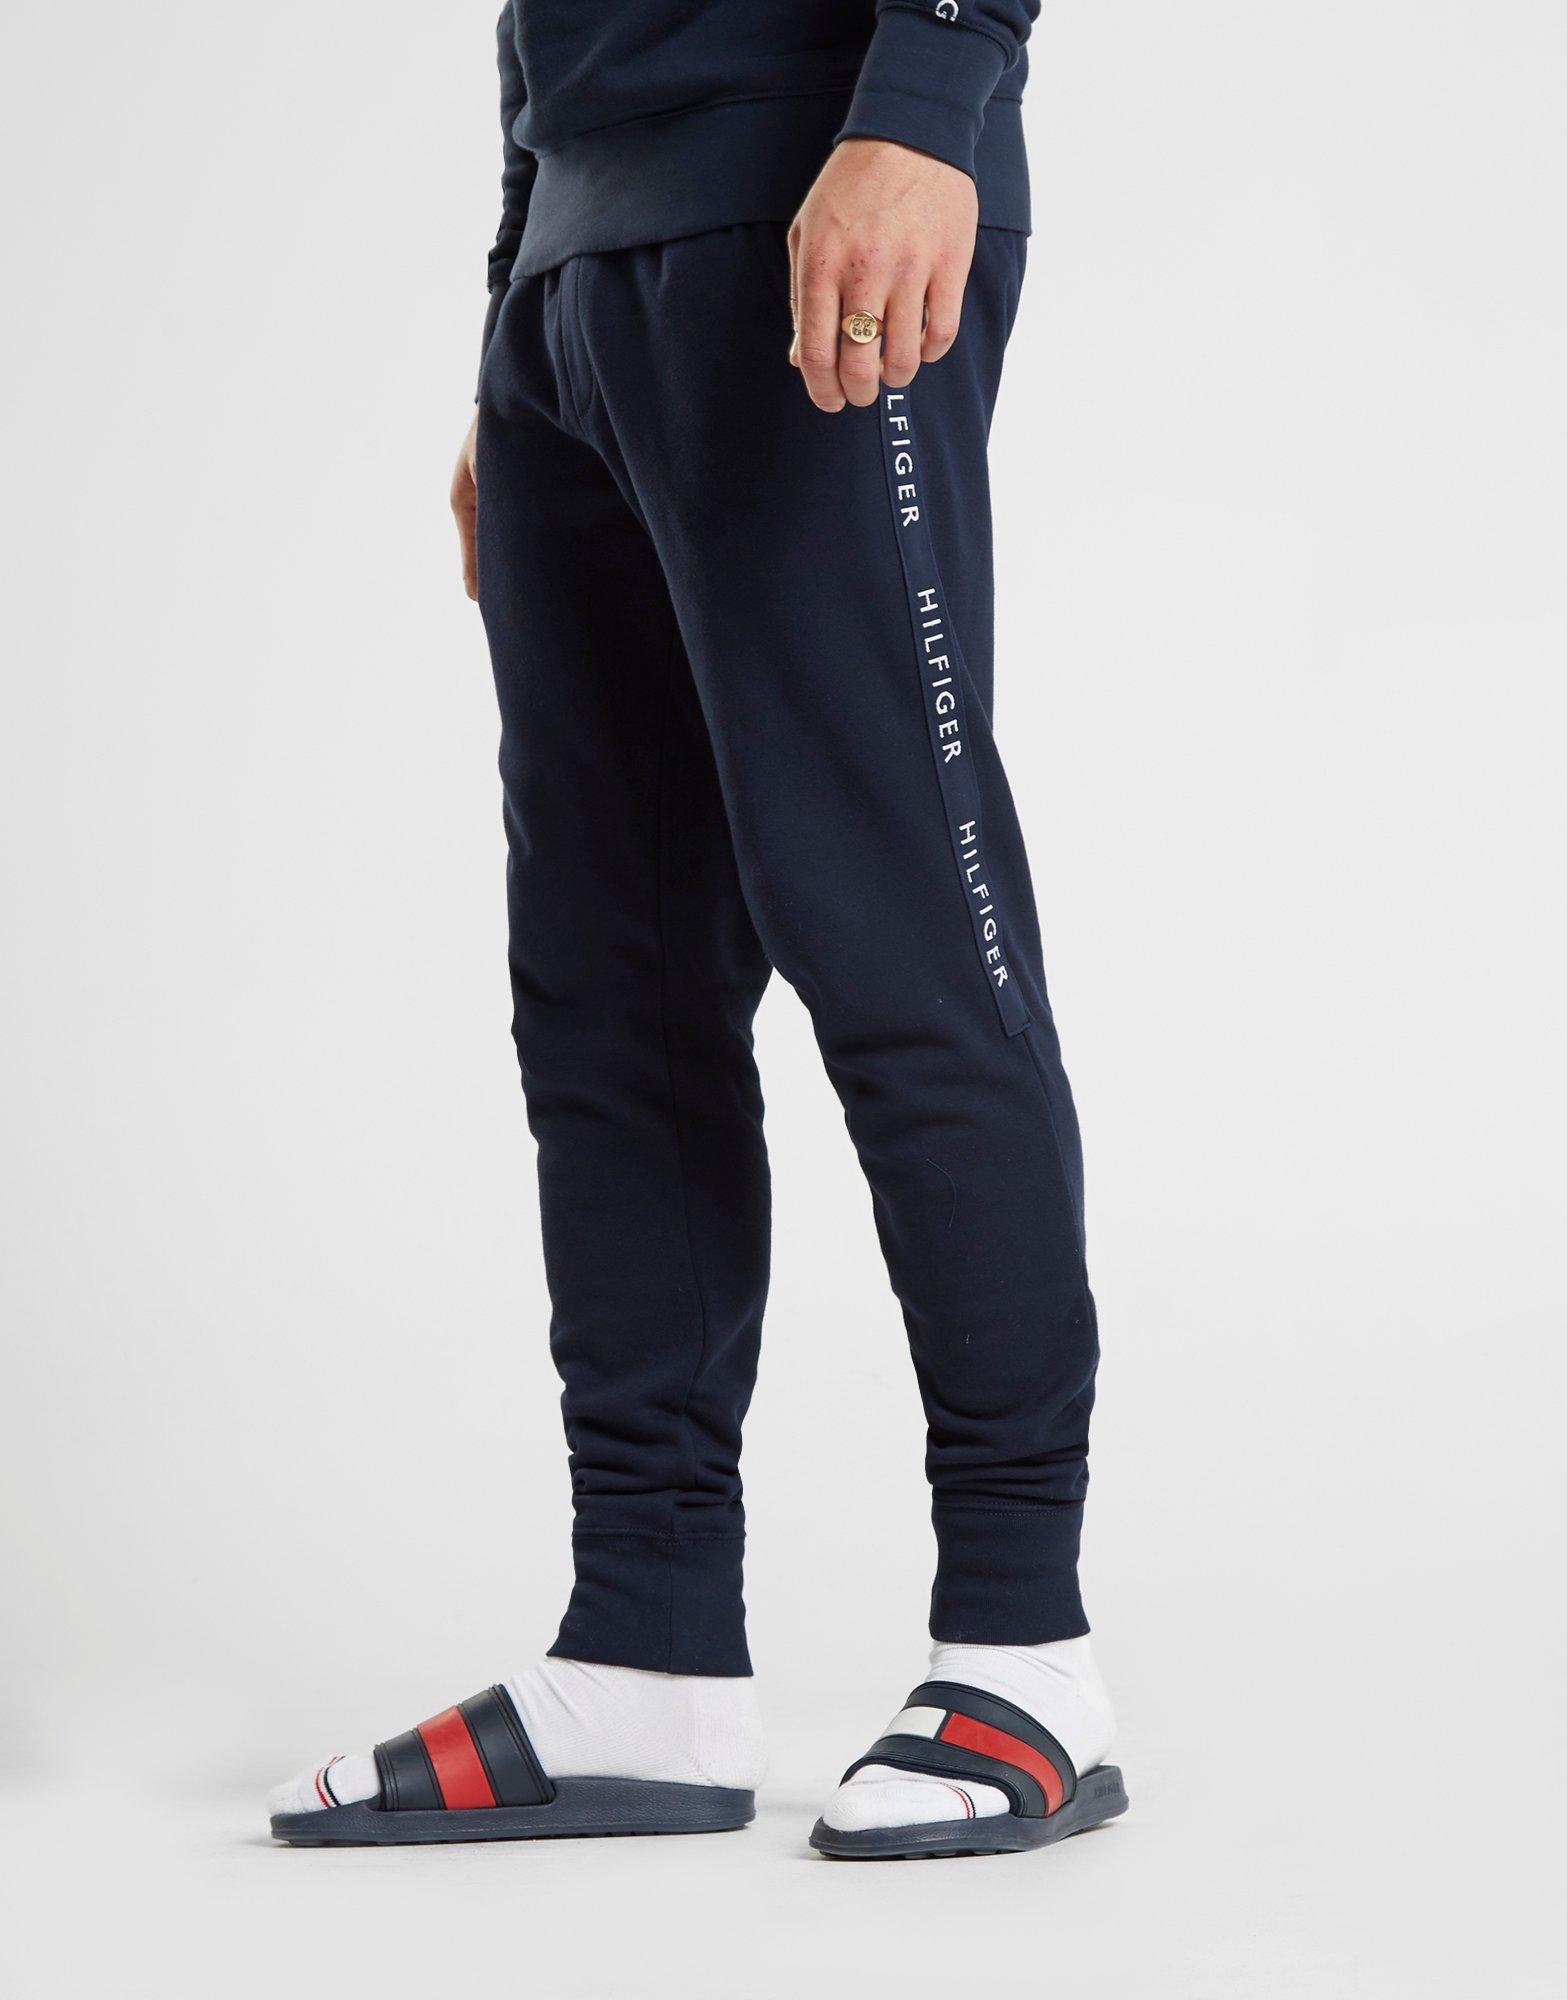 tommy hilfiger tape pants Cheaper Than 